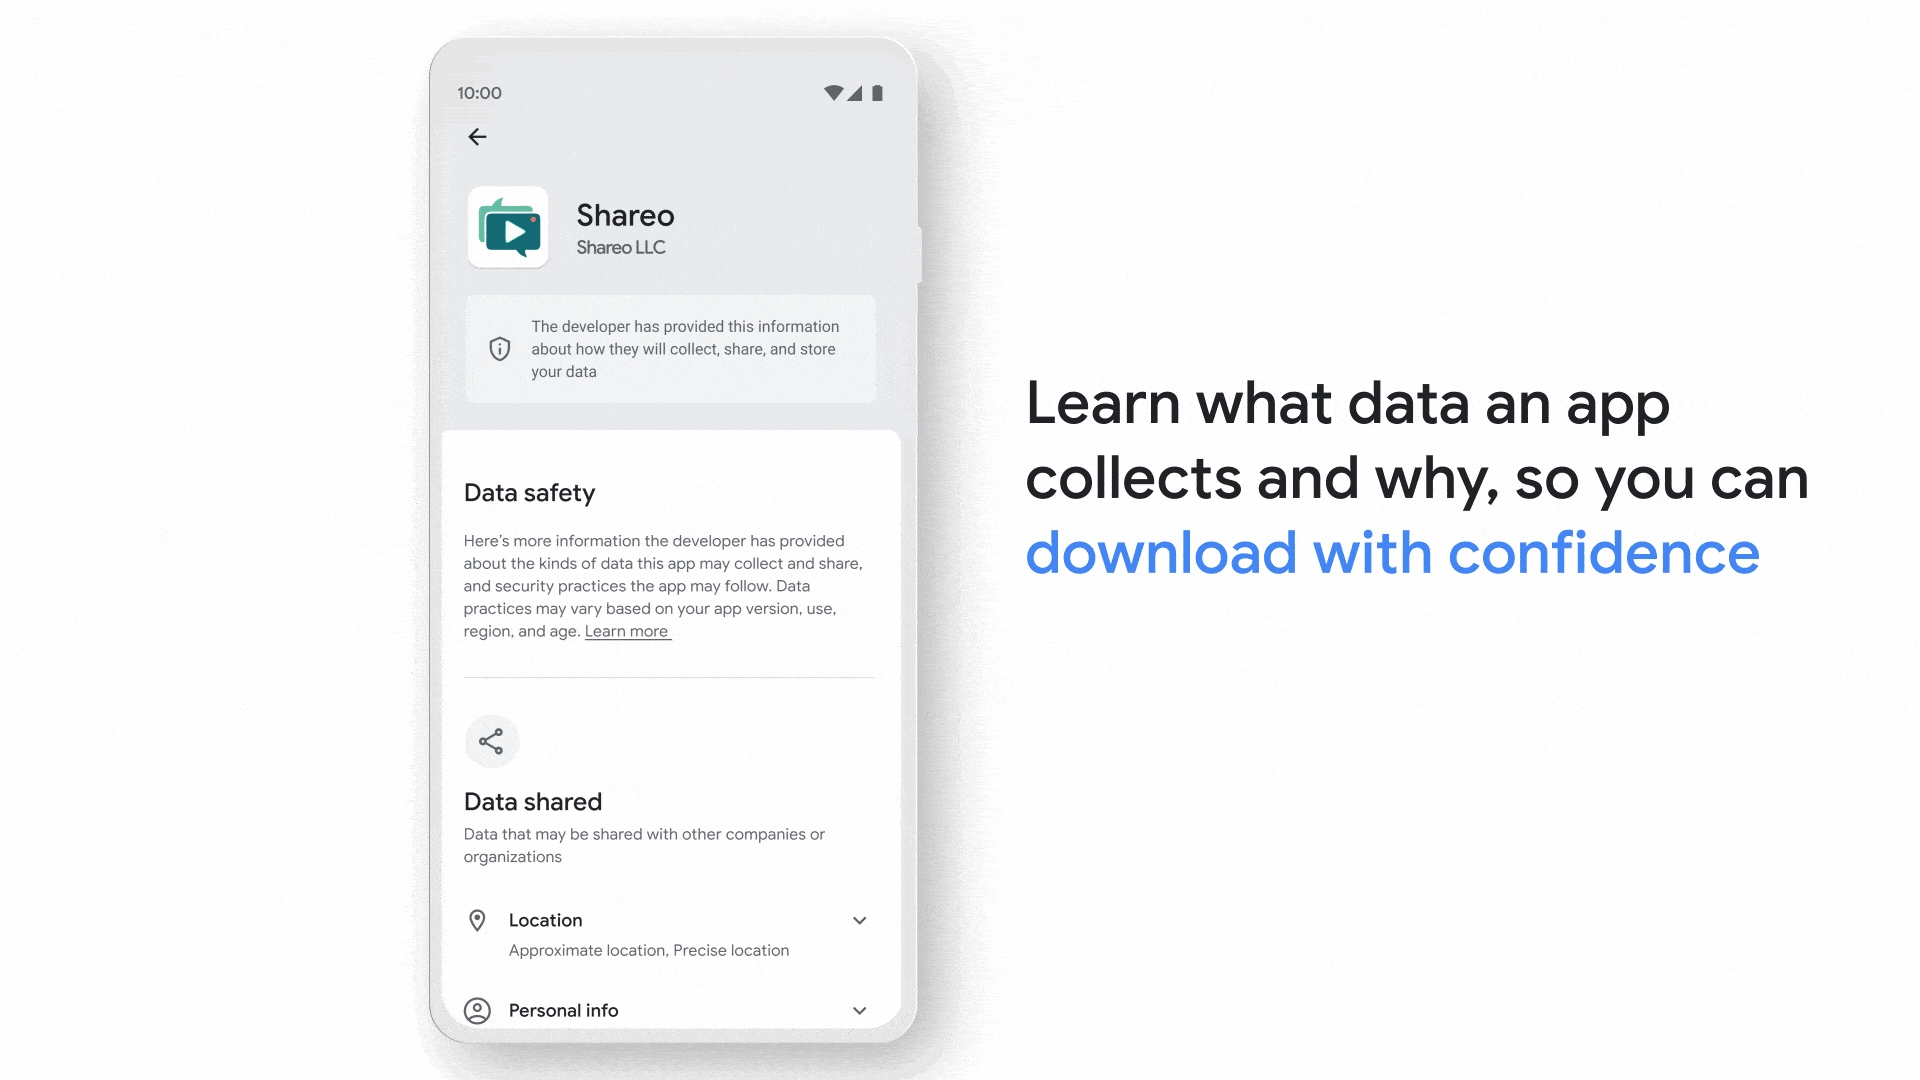 Google Play's new data safety section